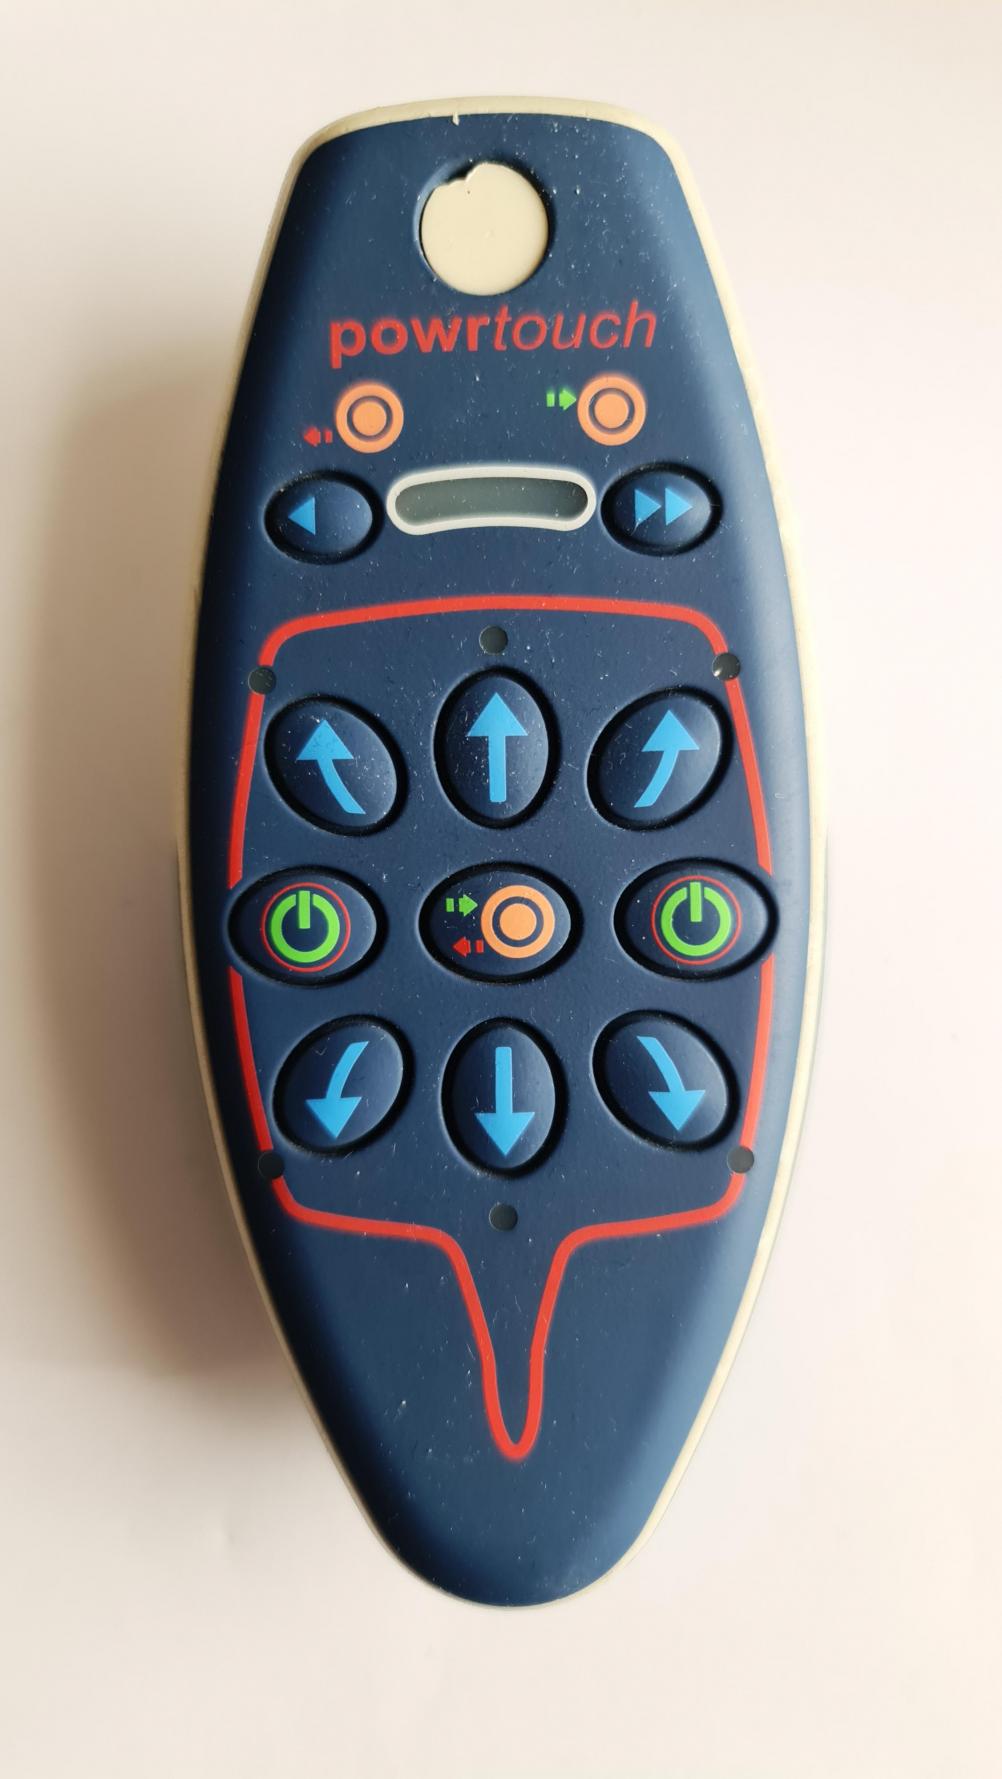 Power touch  Remote Control - Front Image